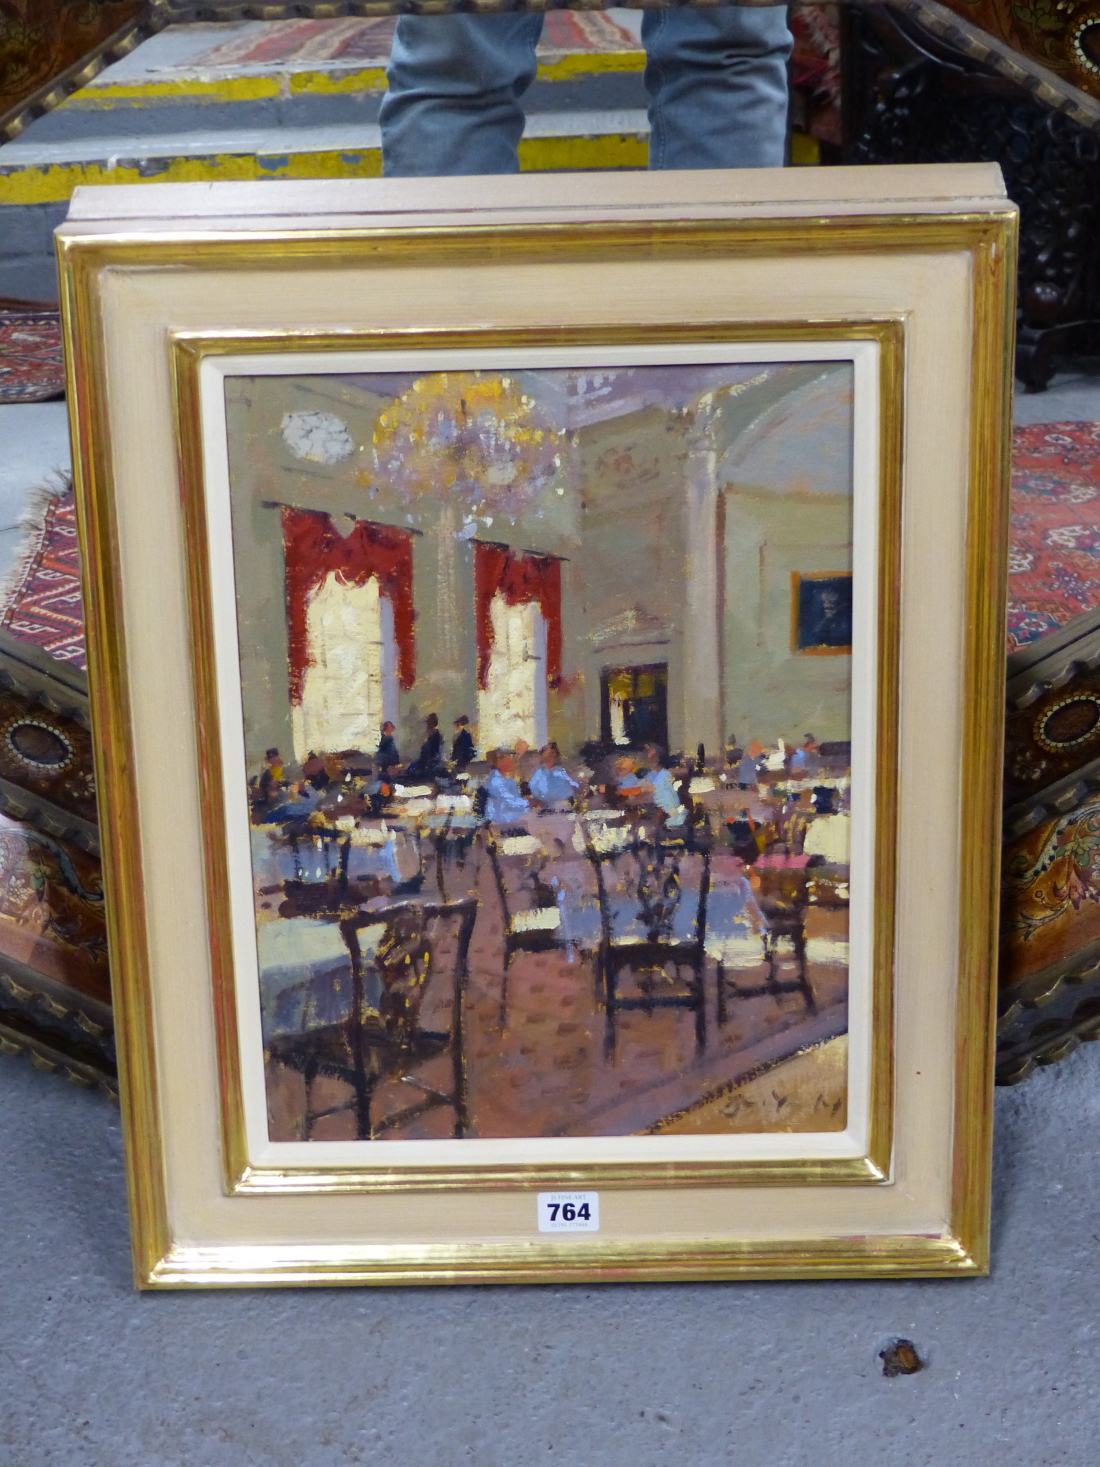 BRUCE YARDLEY (B. 1962), ARR. THE PUMP ROOM, OIL ON CANVAS, SIGNED LOWER RIGHT. 39.5 x 29.5cms - Image 3 of 6